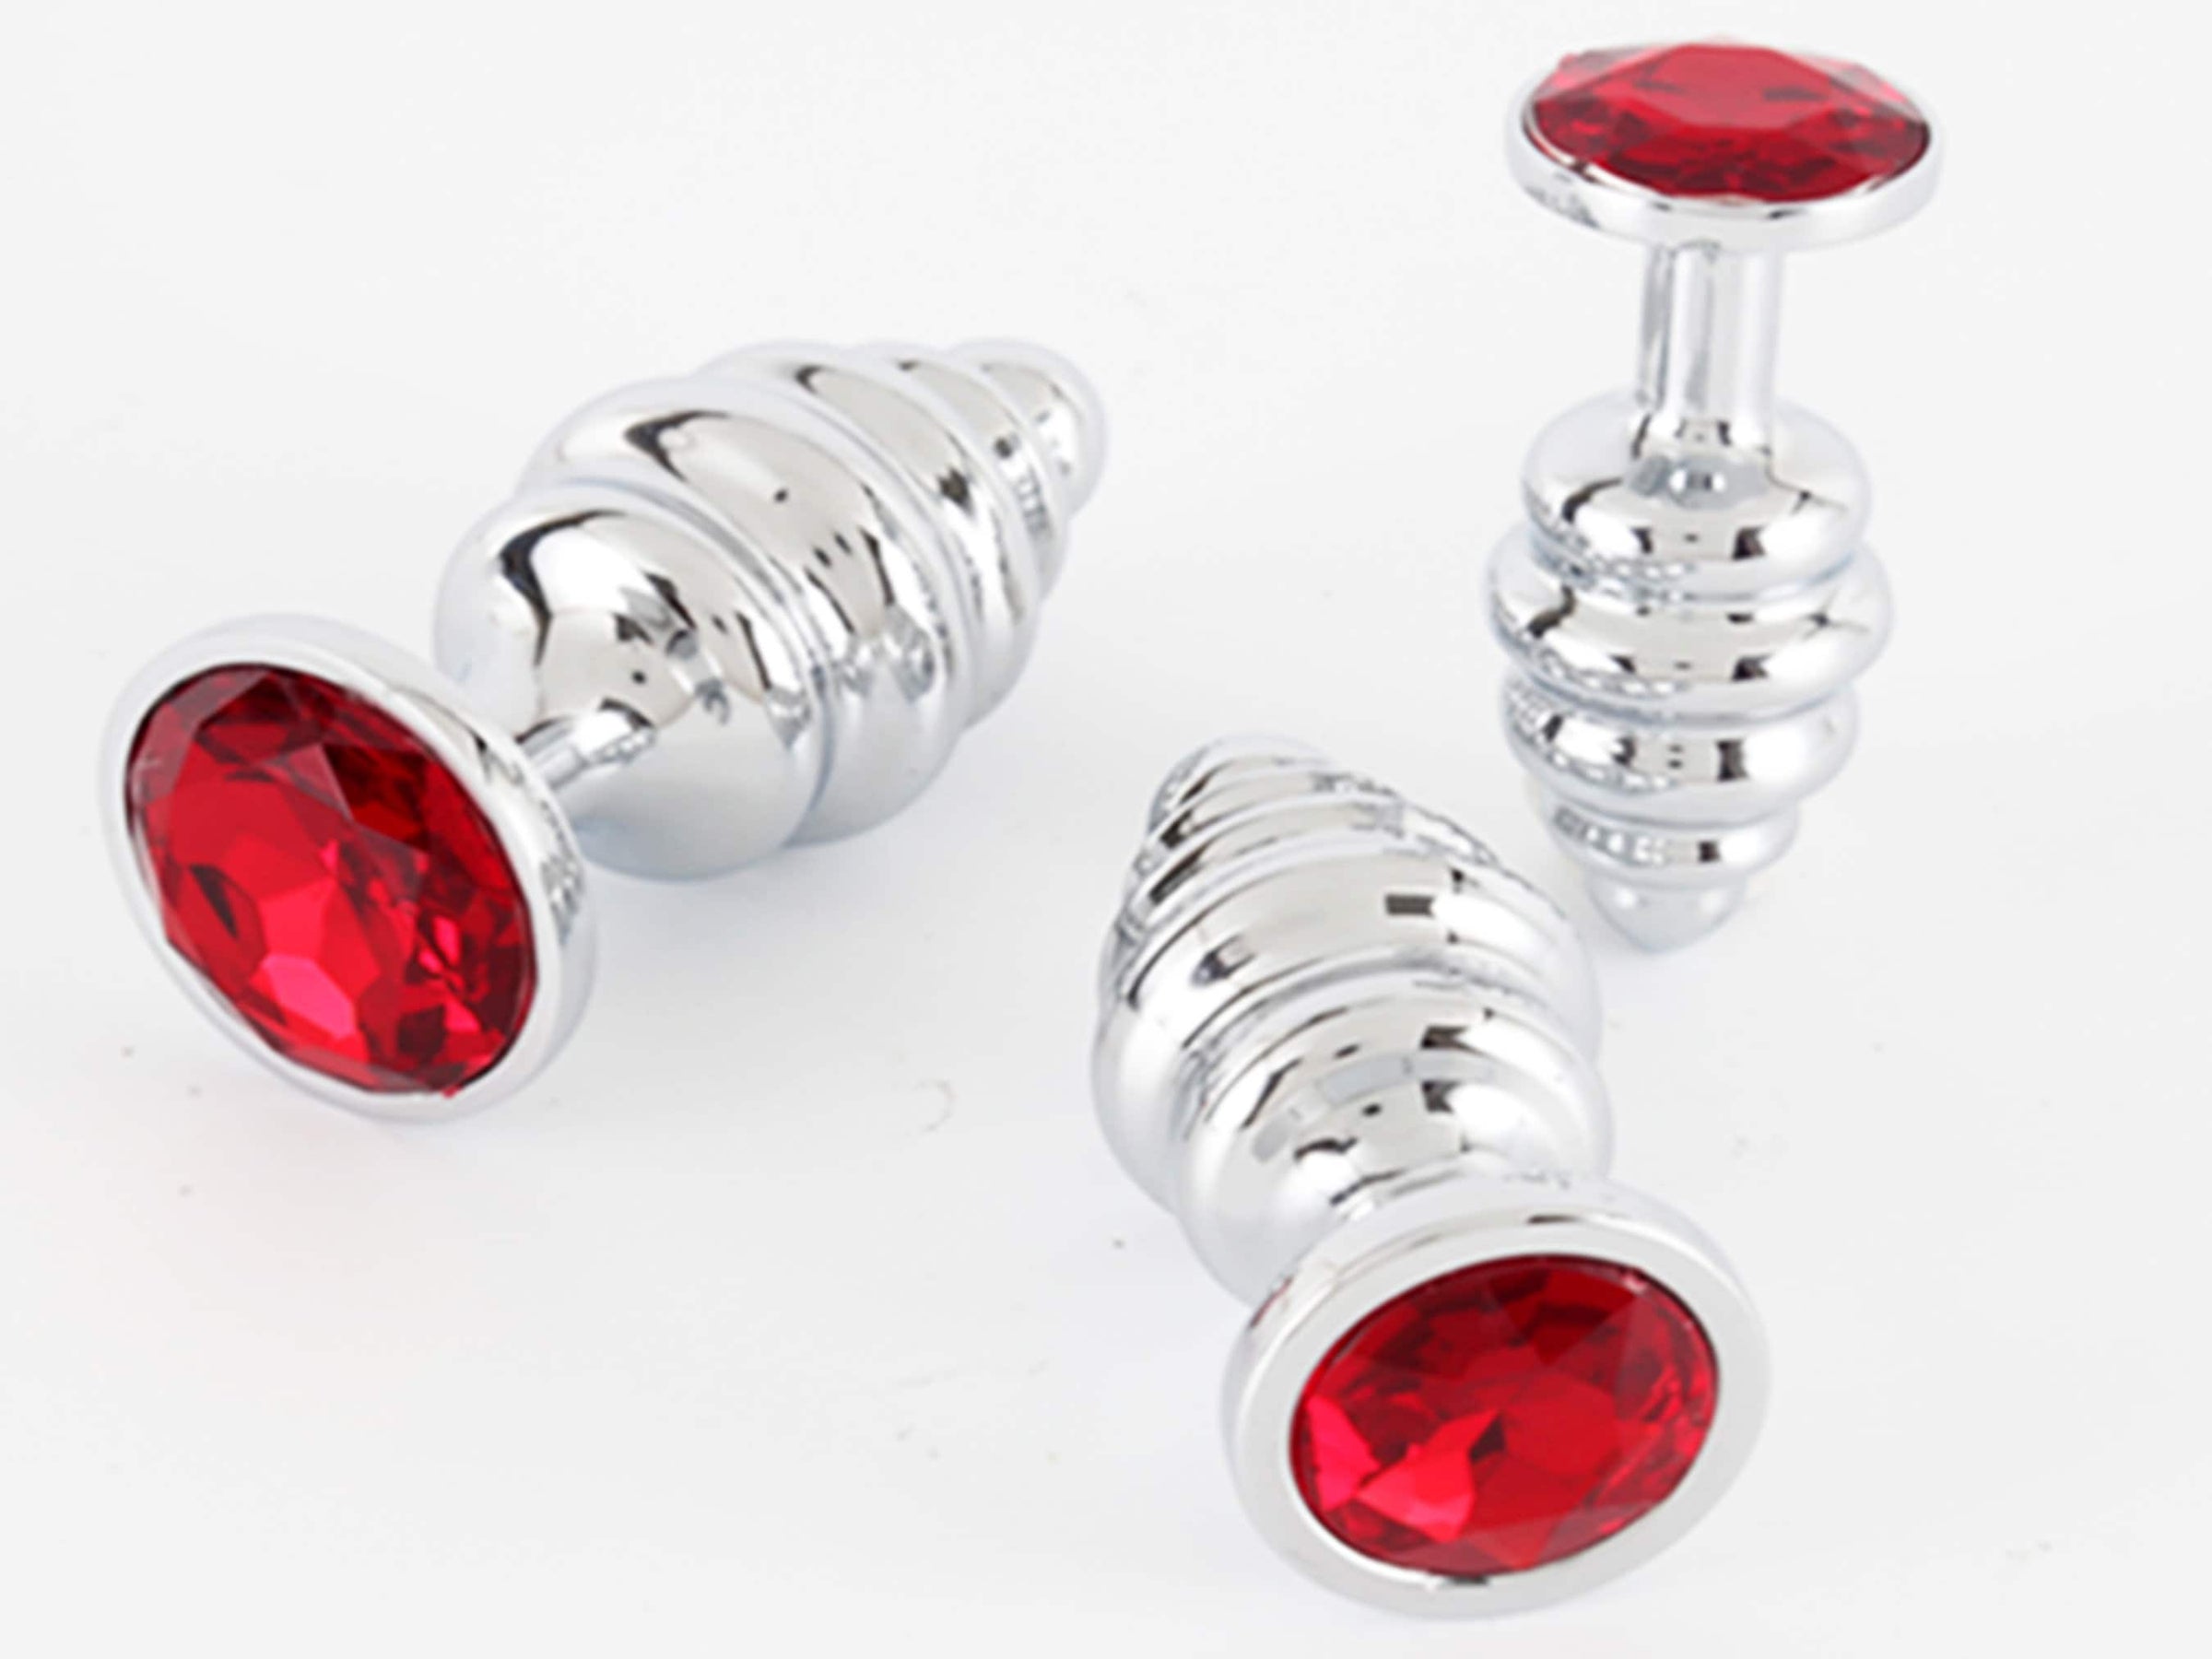 RED Acrylic Crystal Butt Honeycomb Screw based plug 3 sizes anal toy s